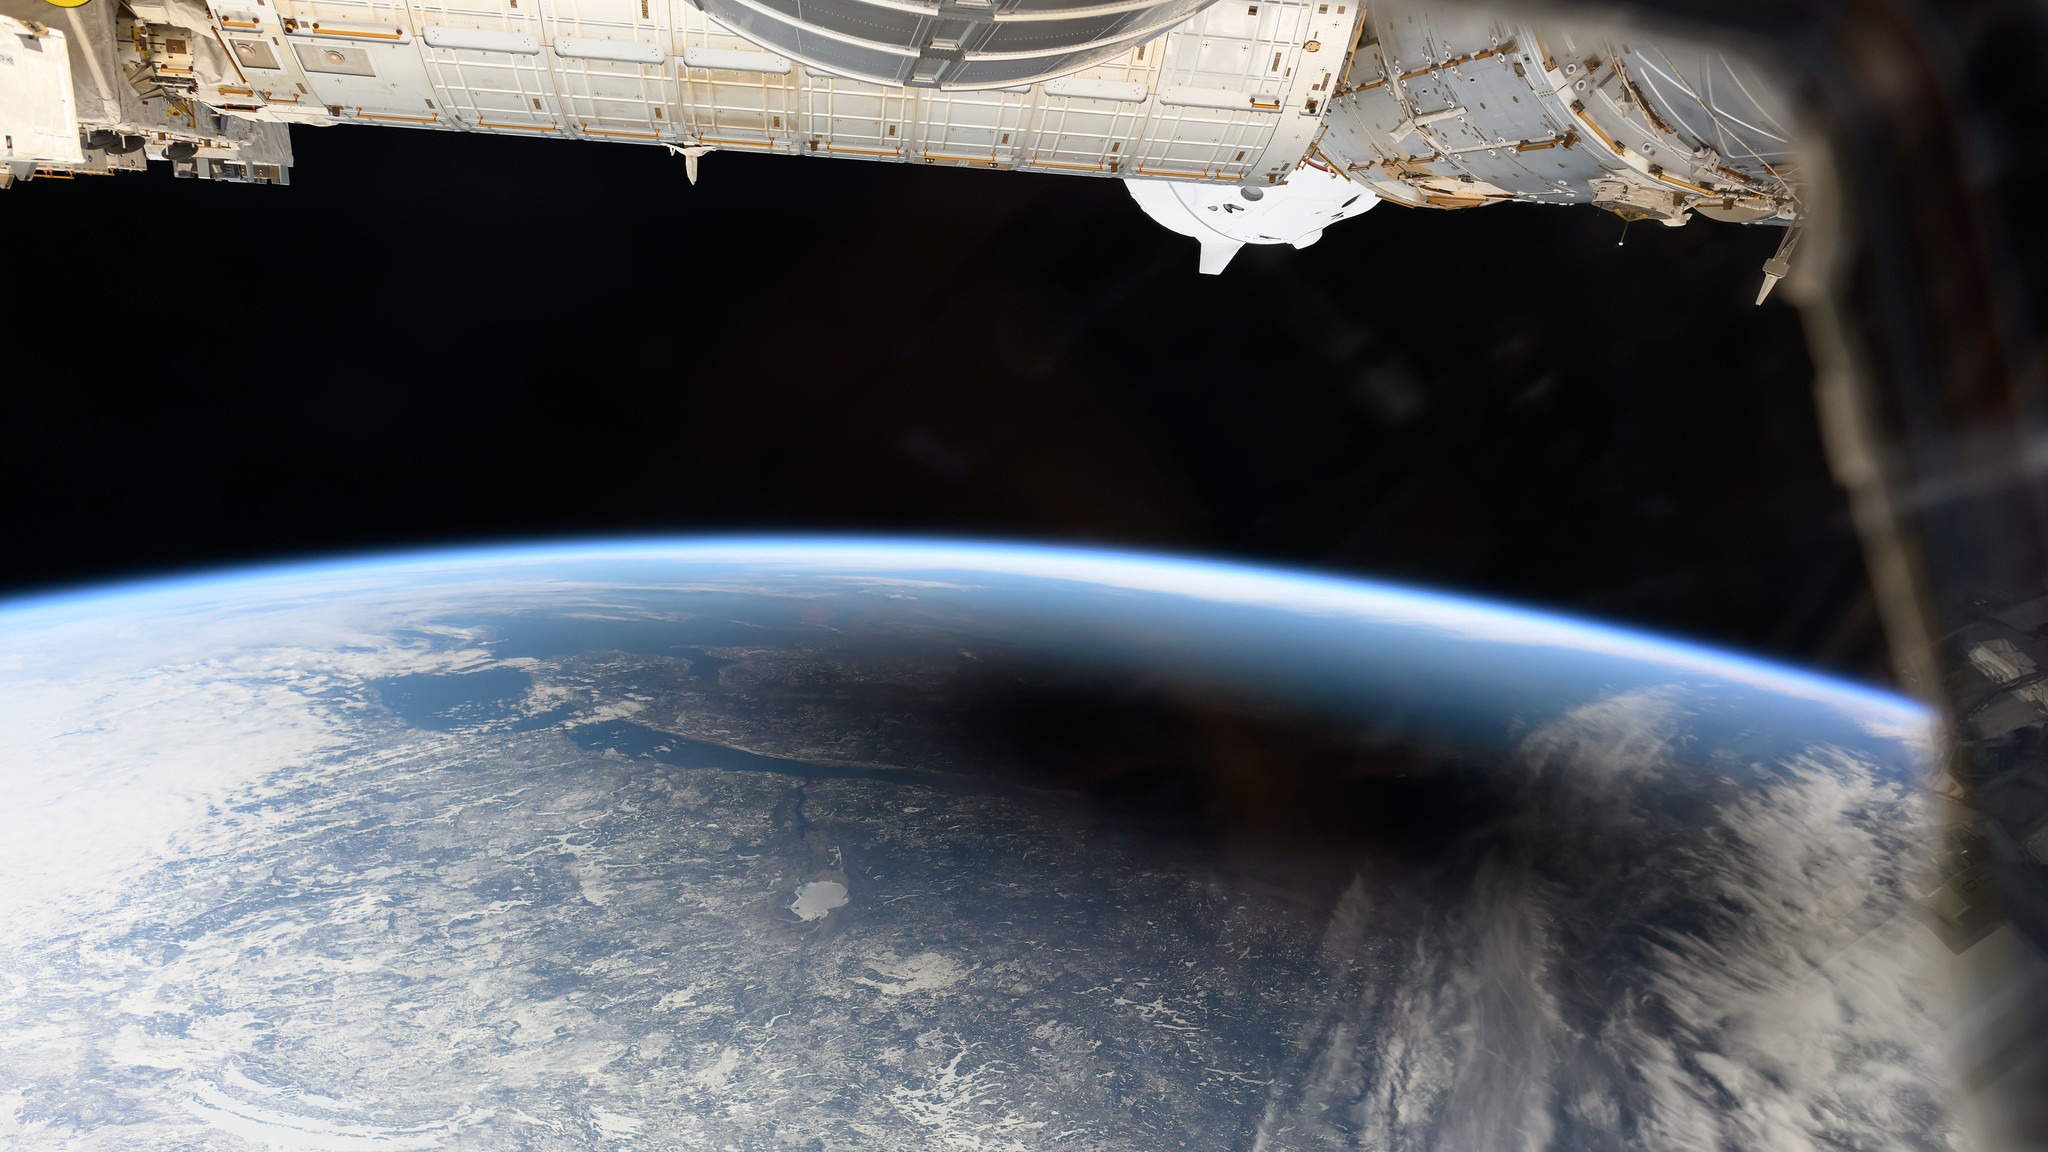 the earth with a black shadow over it. the international space station's modules are visible just above